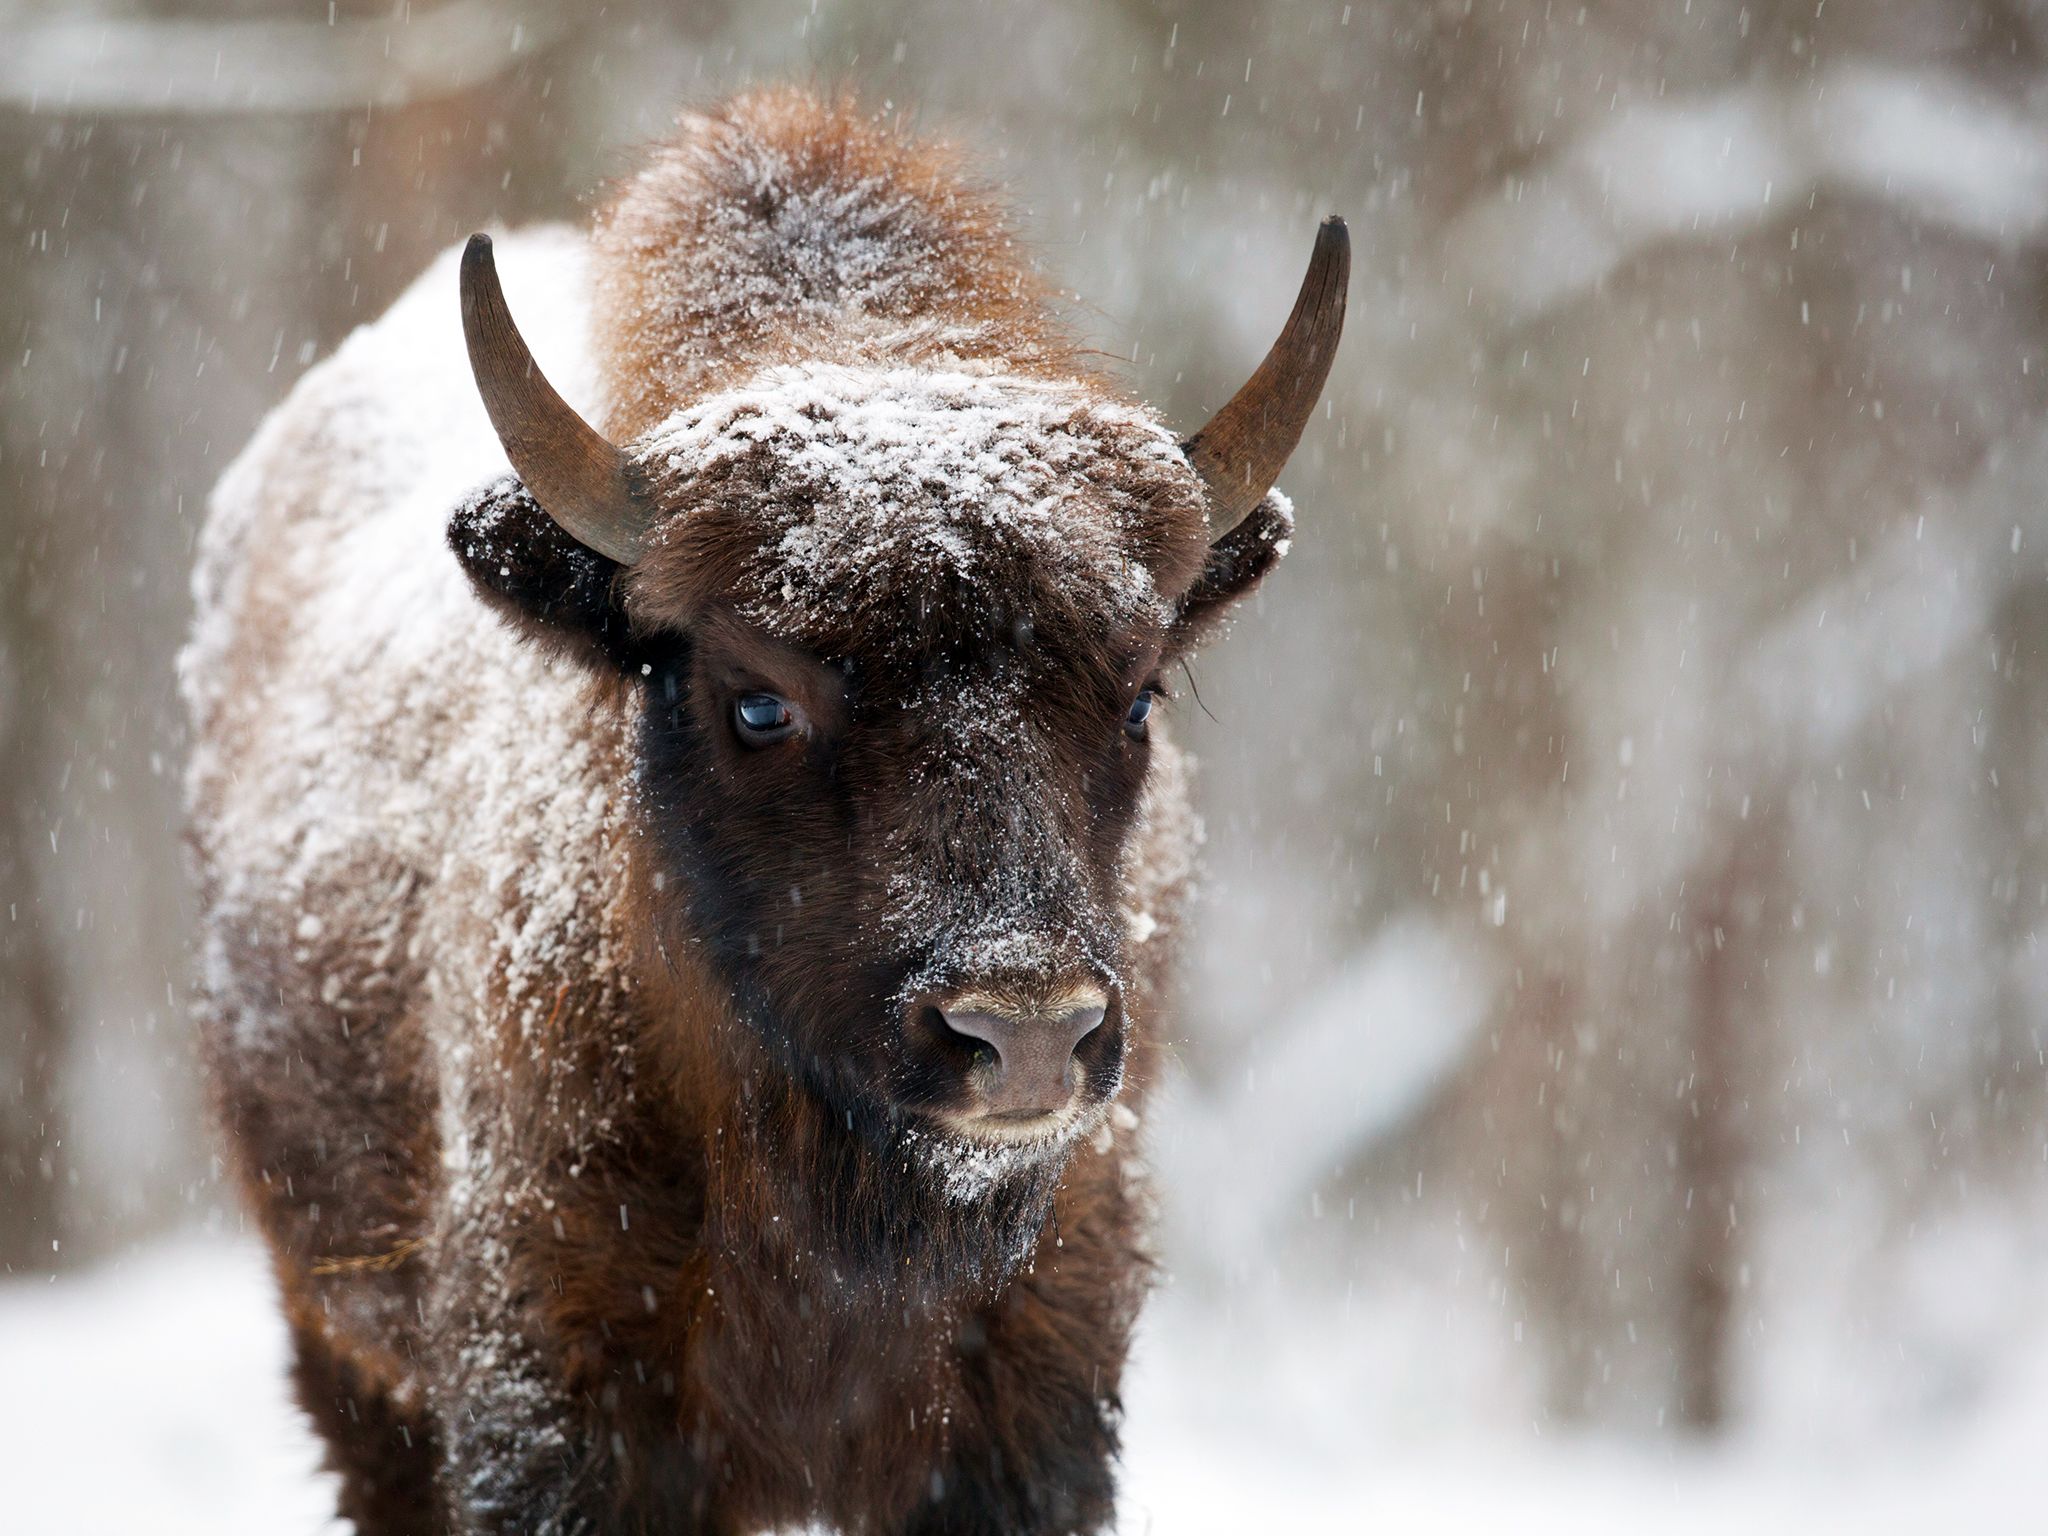 Khoiniki, Belarus: A bison stands alone getting covered by snow. This image is from Urban Jungle. [Photo of the day - December 2014]